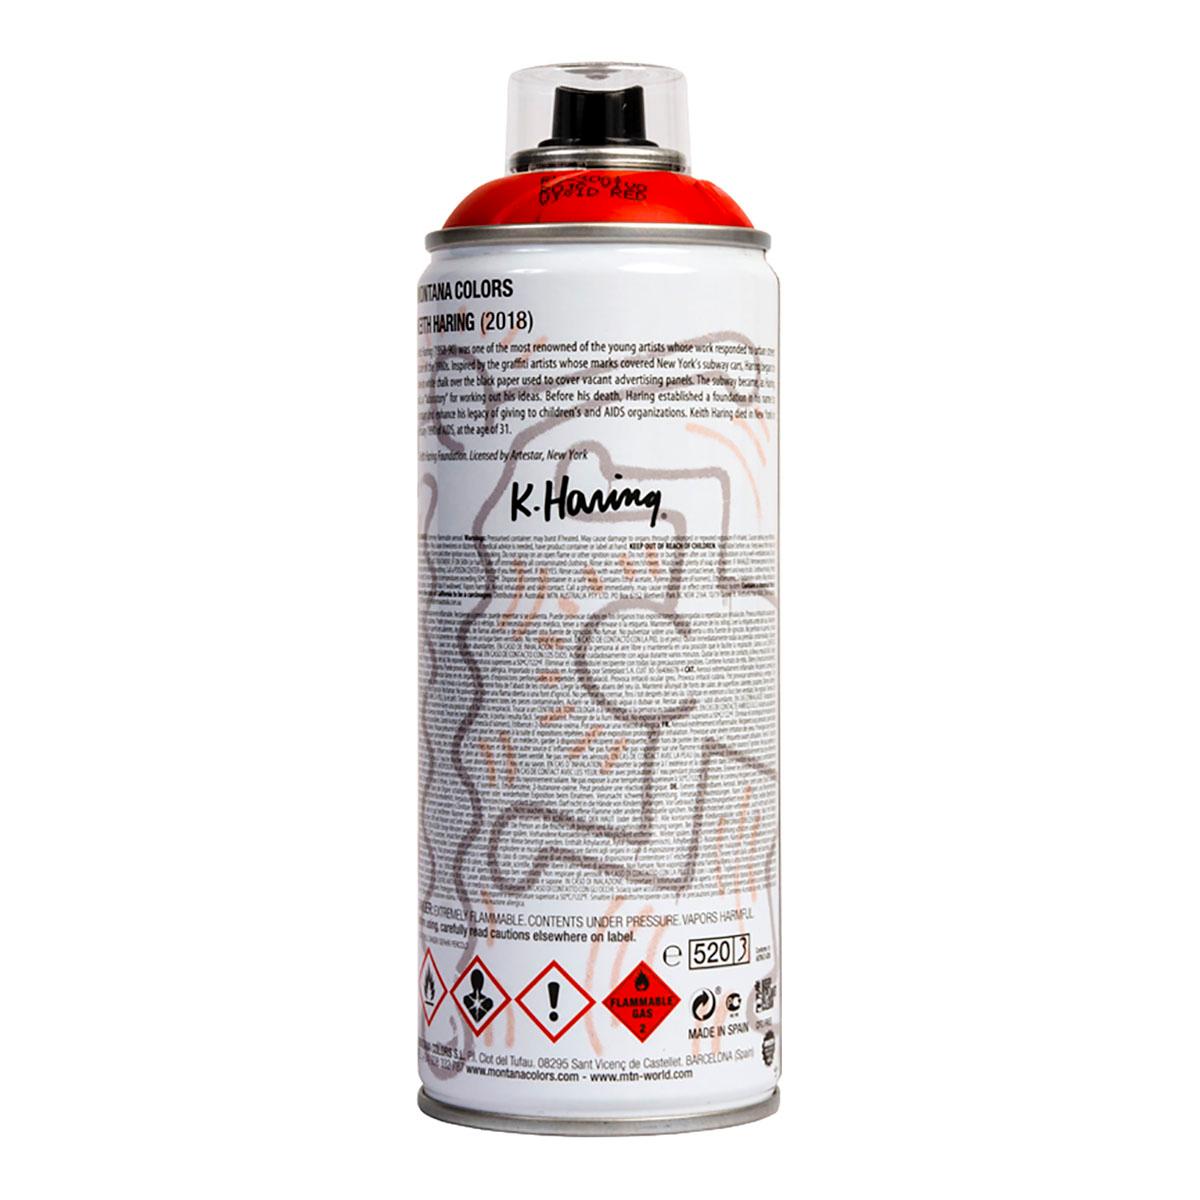 Limited edition Keith Haring spray paint can - Print by (after) Keith Haring